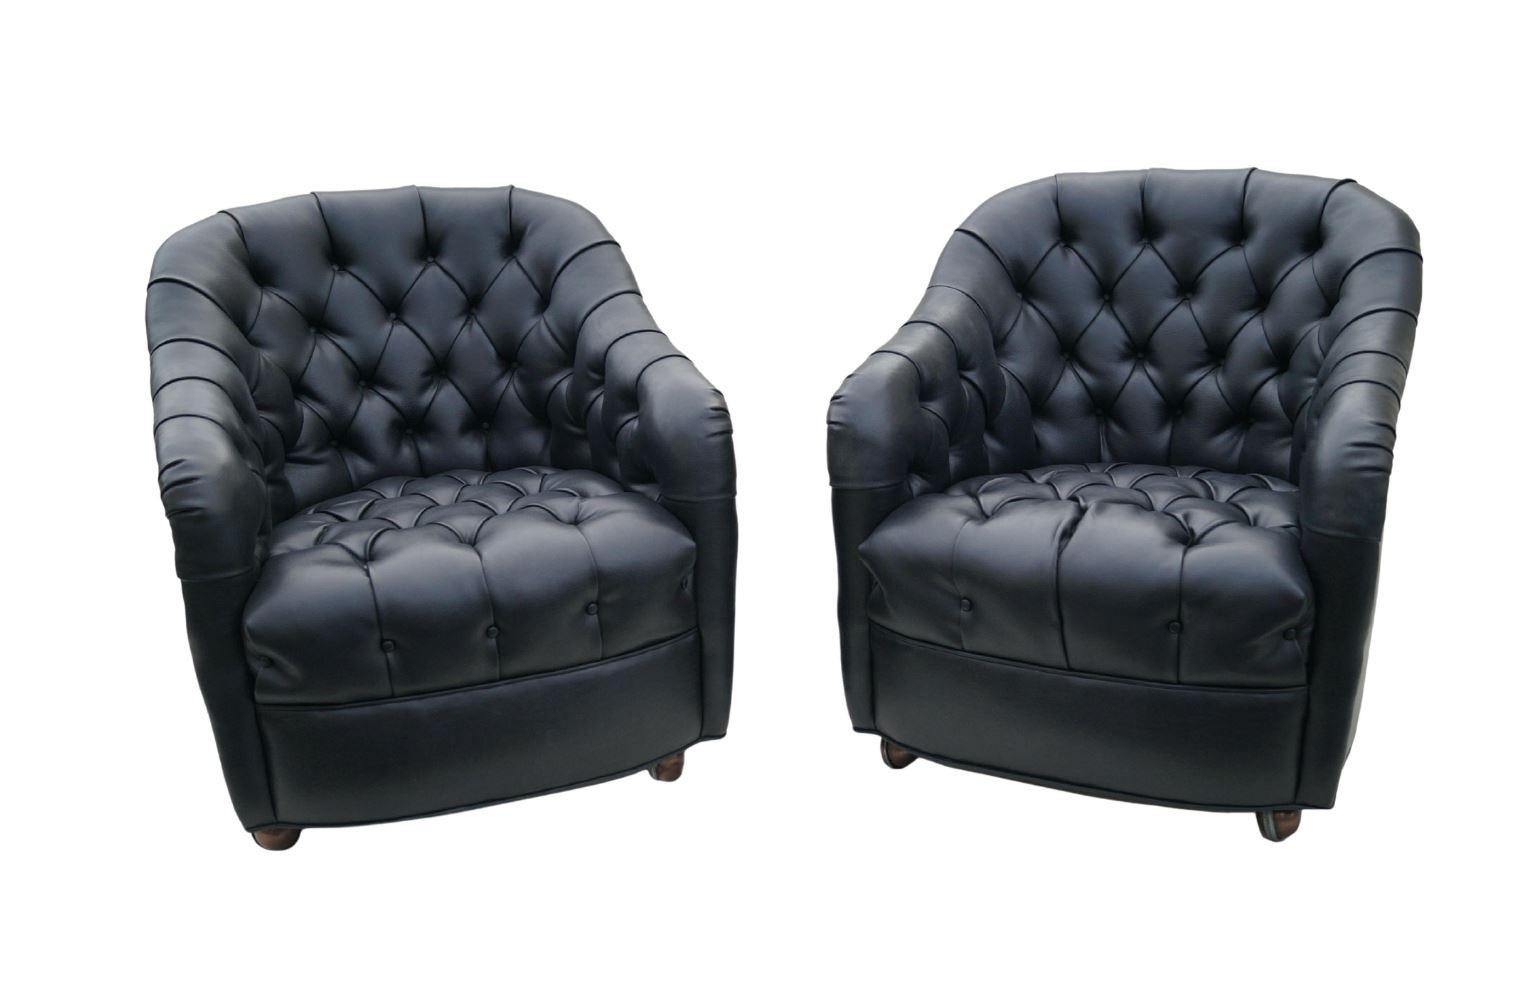 Pair of Black Mid-Century Modern Ward Bennett Style Tufted Lounge Chairs Casters In Good Condition For Sale In Wayne, NJ